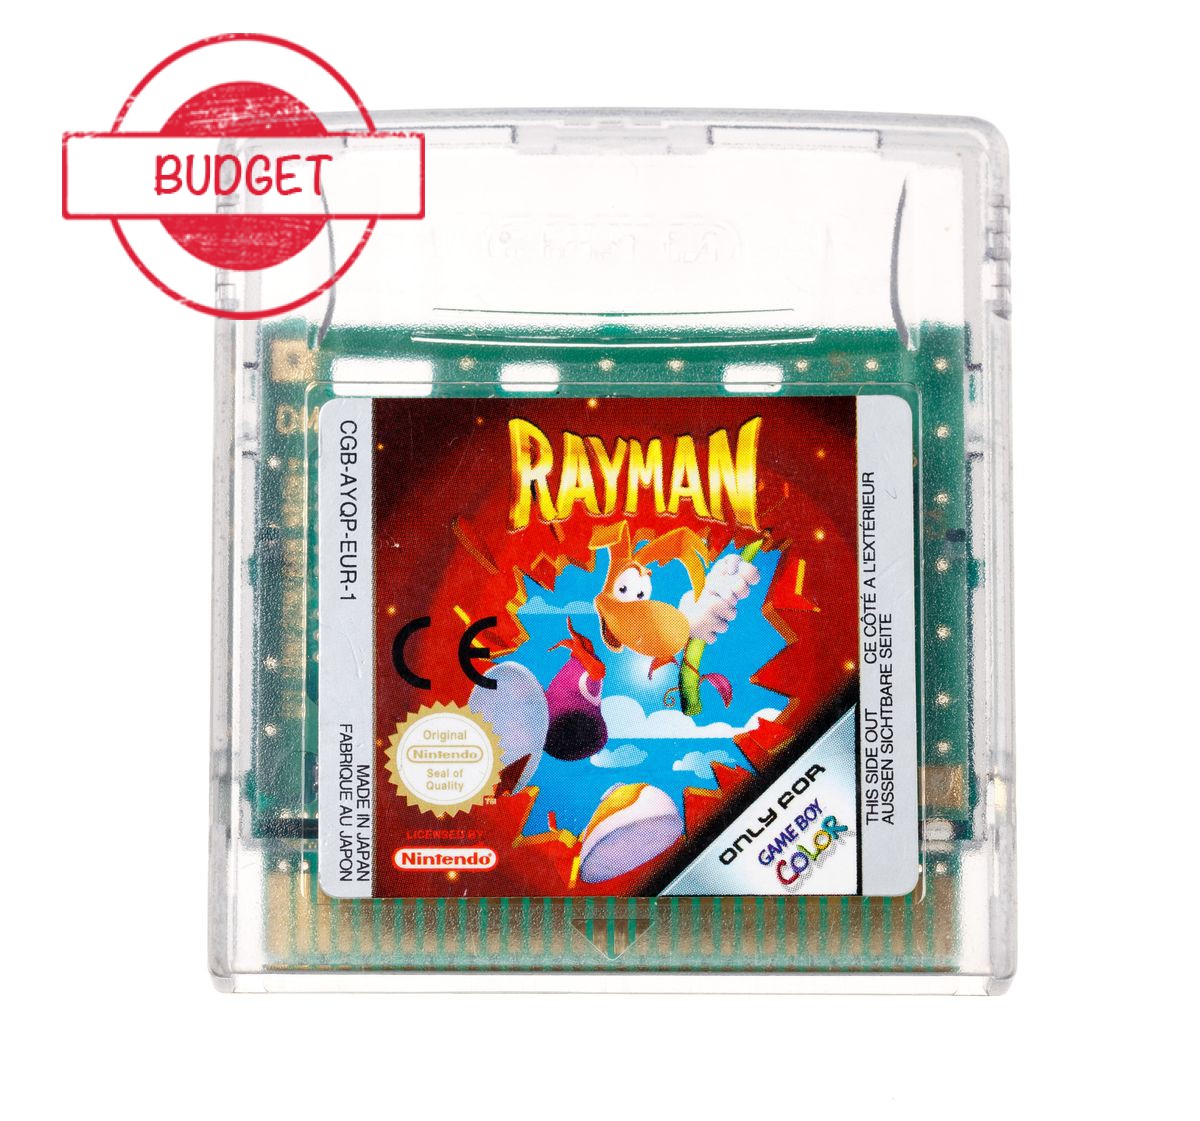 Rayman - Budget - Gameboy Color Games